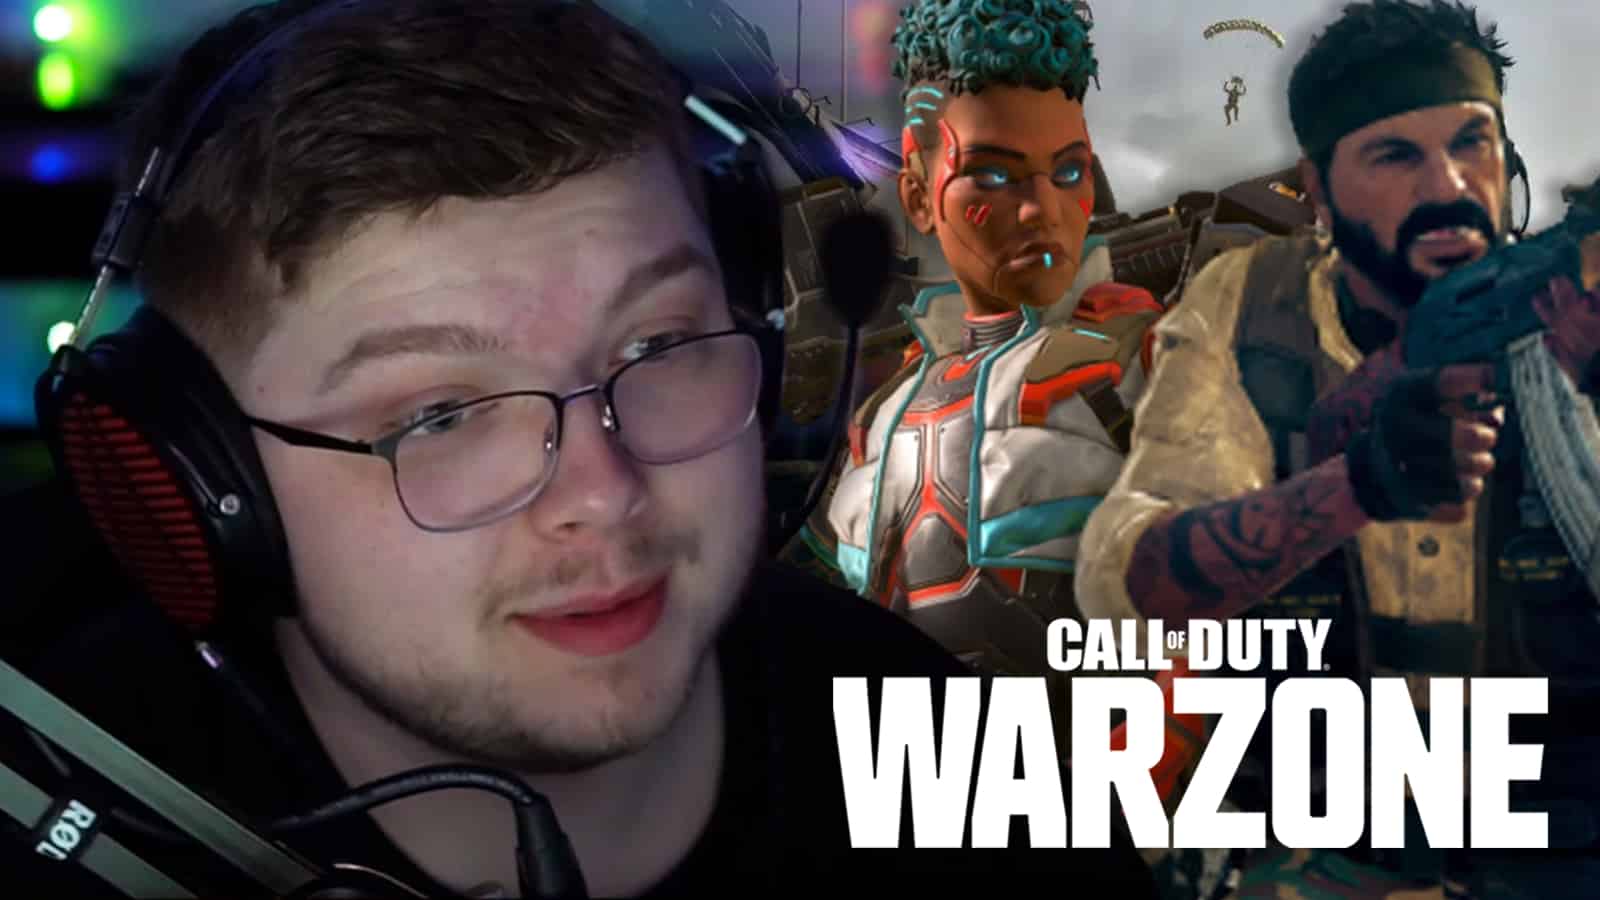 Aydan next to Apex Legends and Warzone characters.